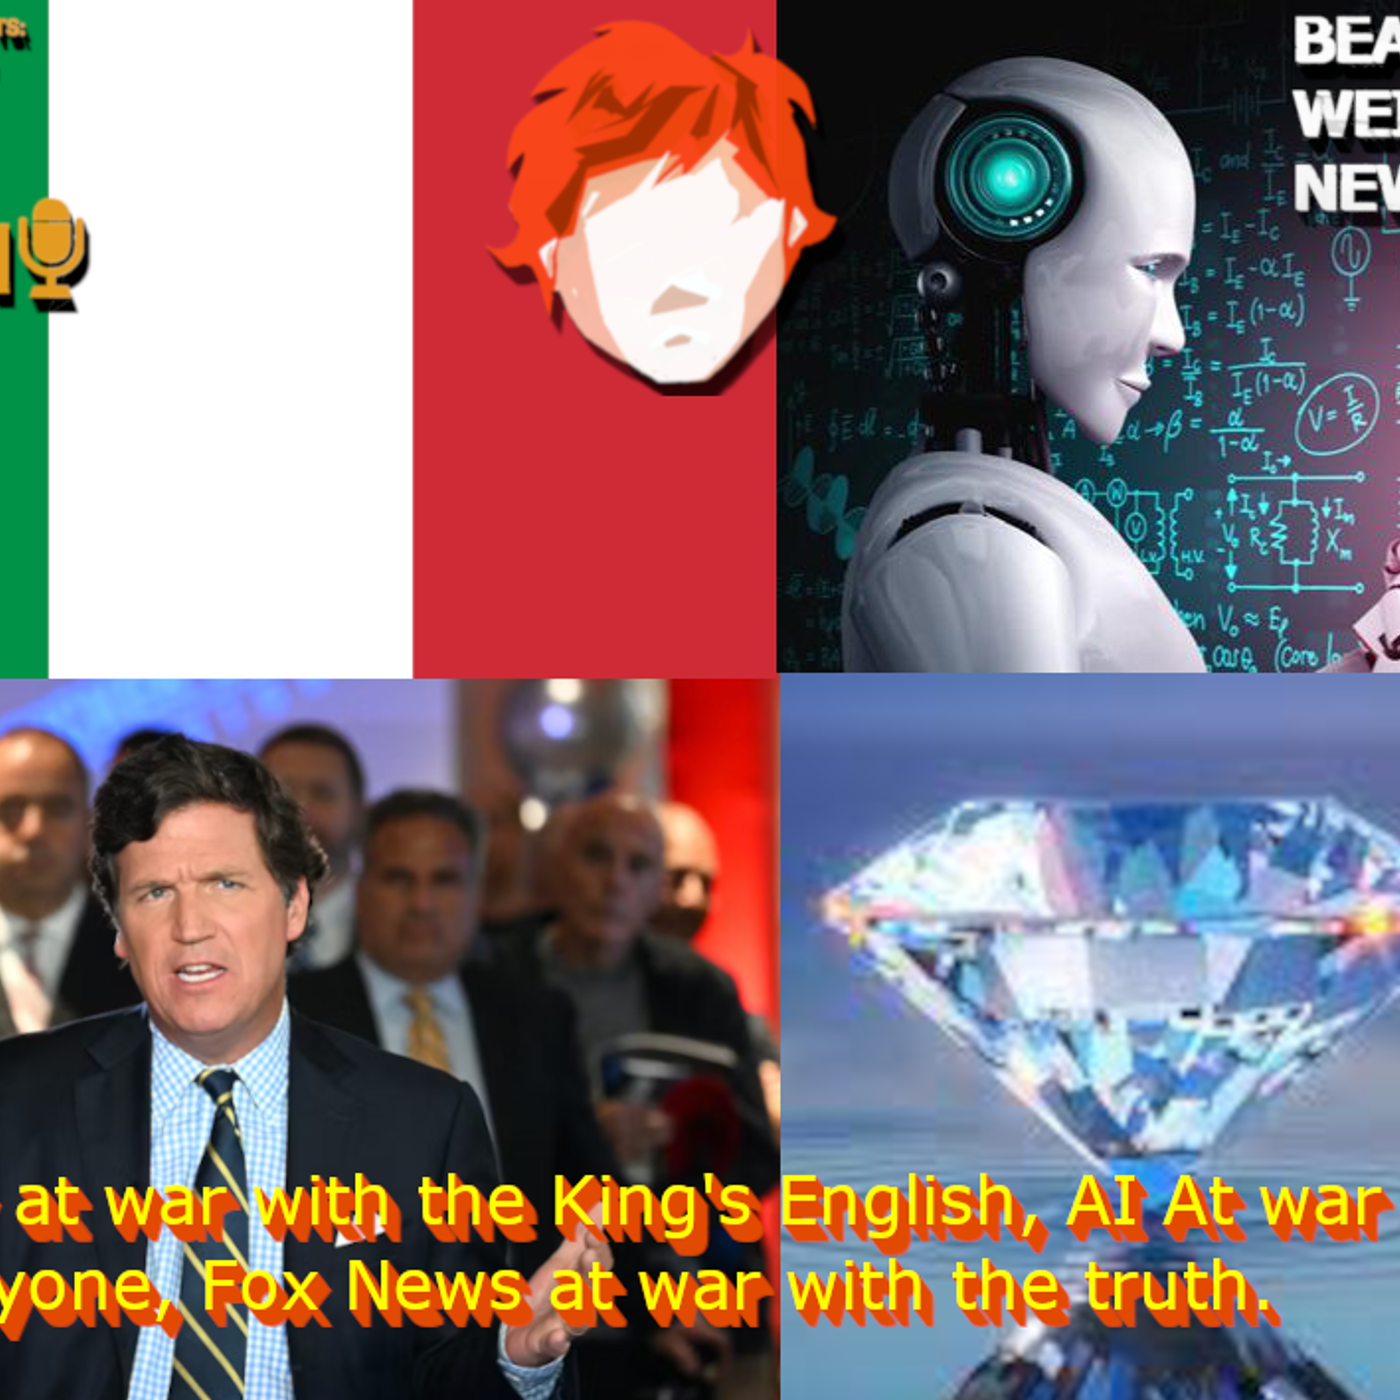 Italy at war with the King's English, AI At war with everyone, Fox News at war with the truth.